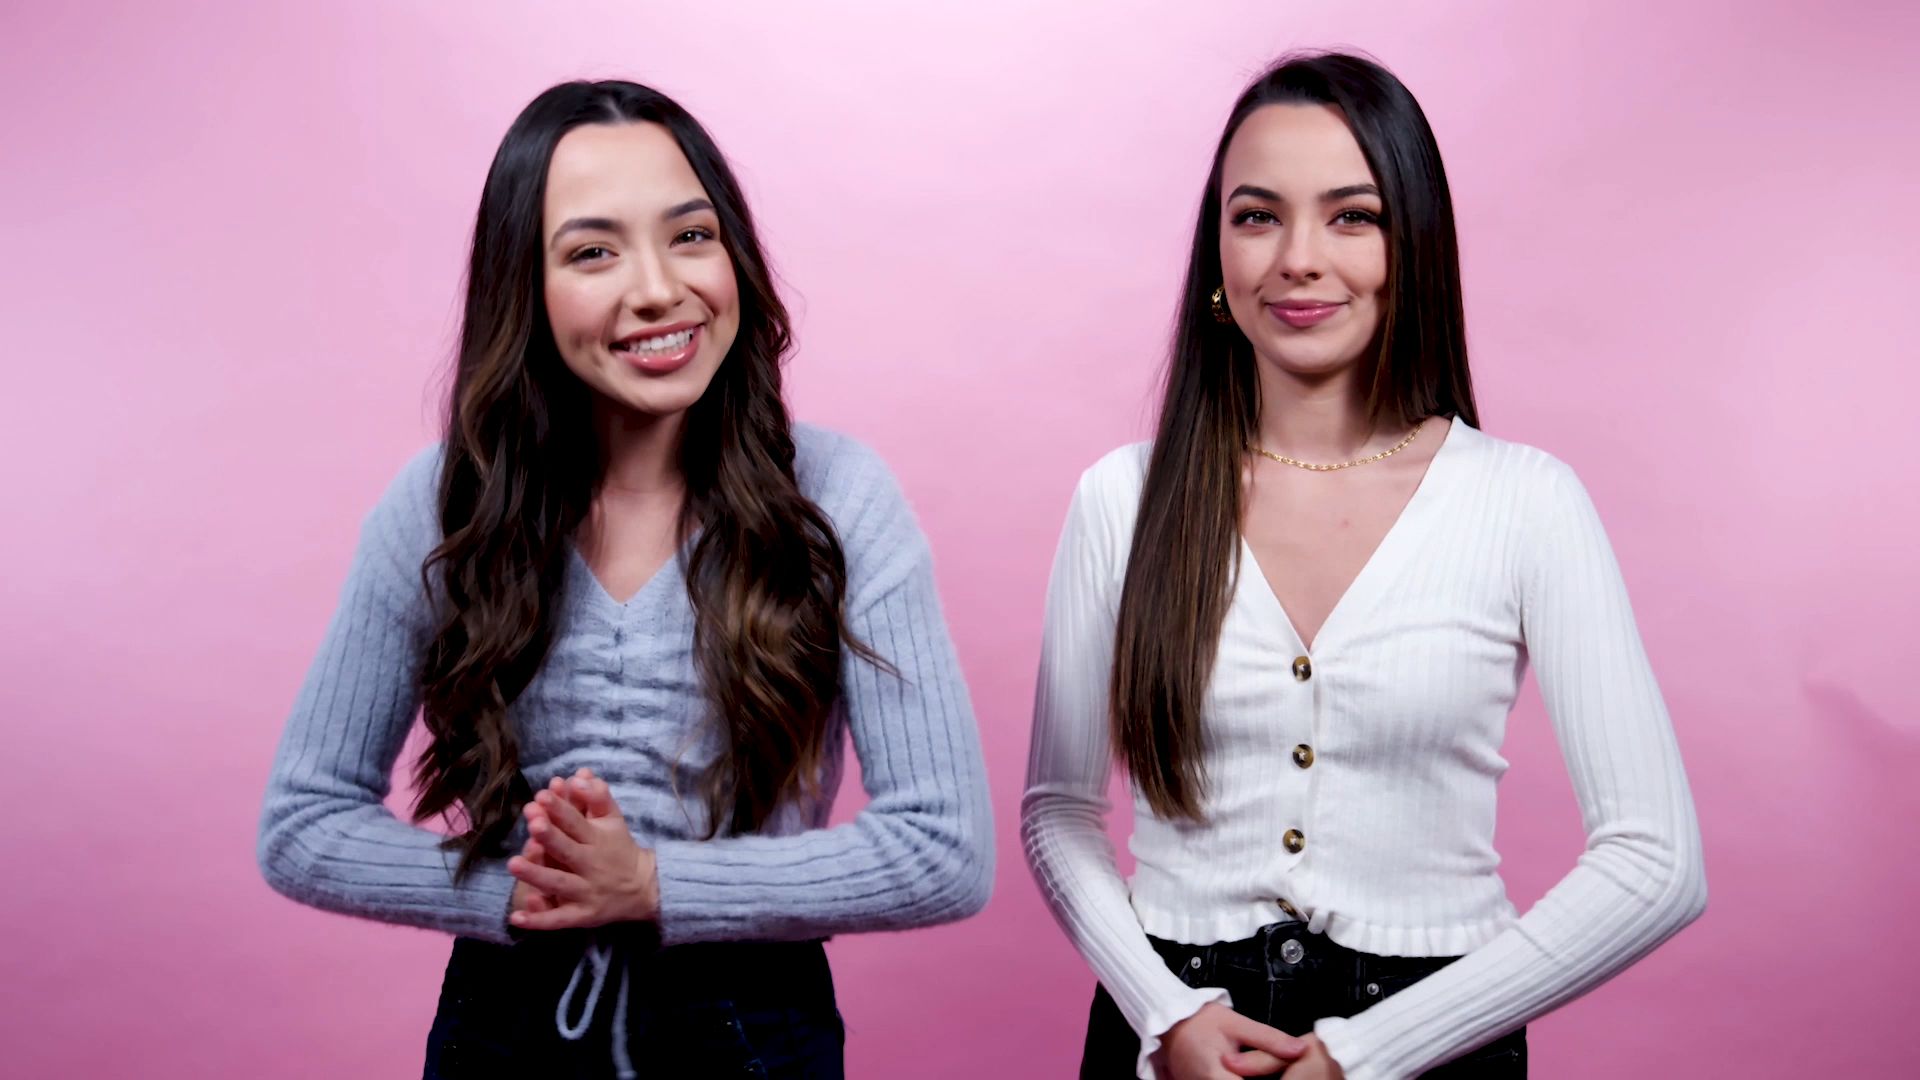 Forretningsmand Ny mening Panorama 11 Facts About the Merrell Twins - Everything to Know About Youtubers  Veronica and Vanessa Merrell